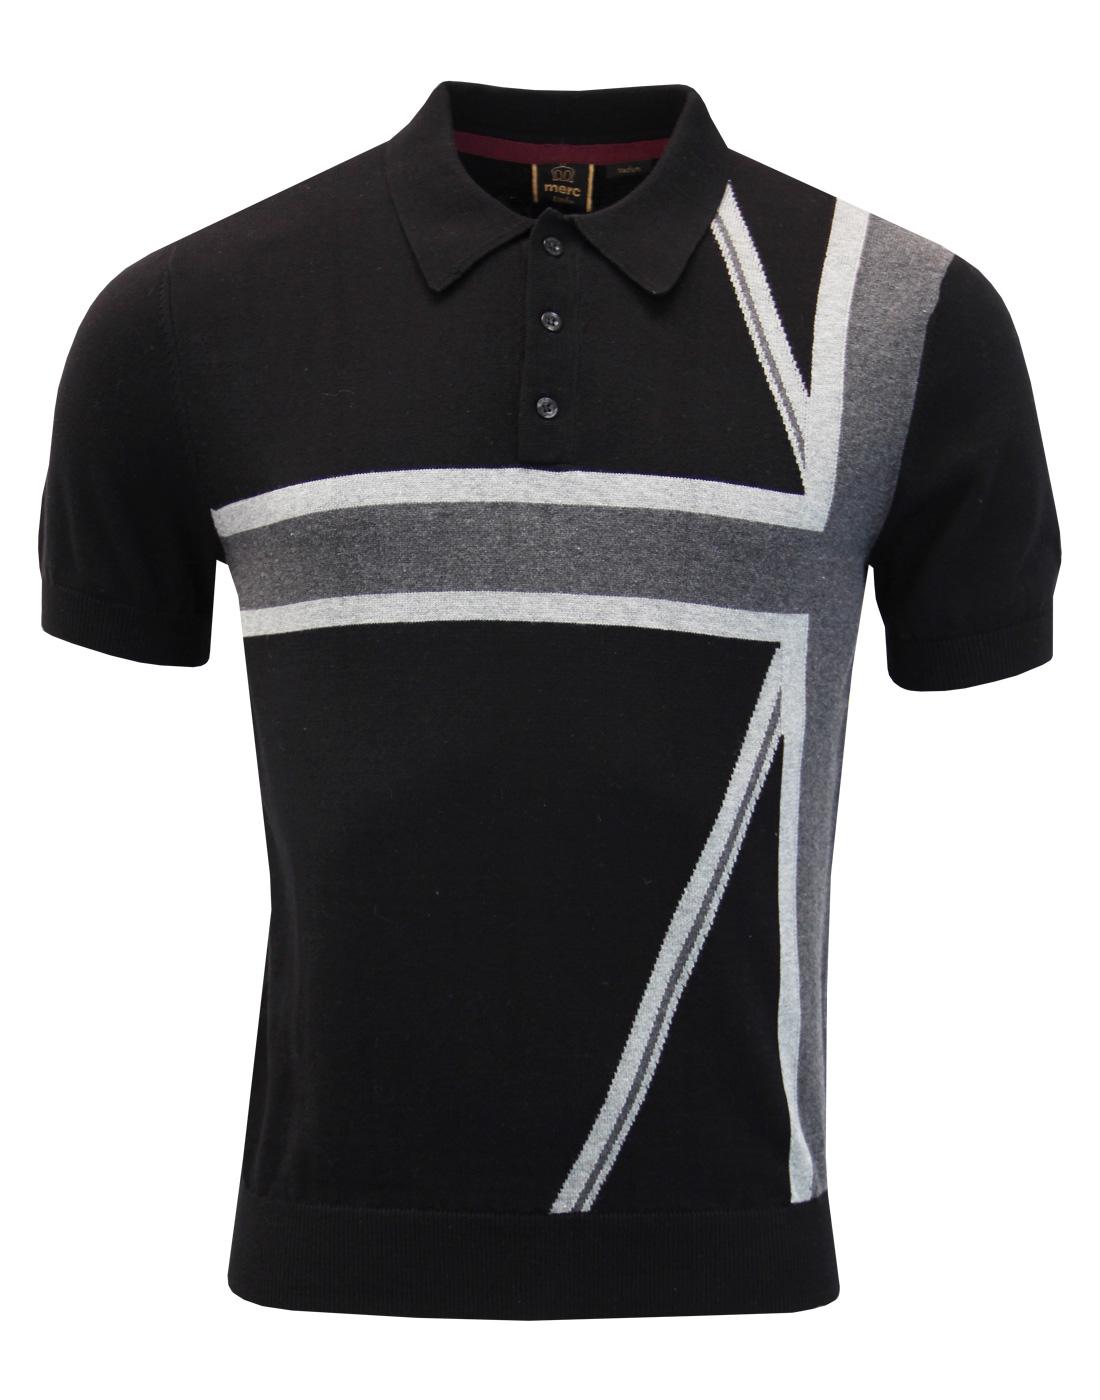 MERC Castle Retro 60s Mod Union Jack Knitted Polo Shirt in Black